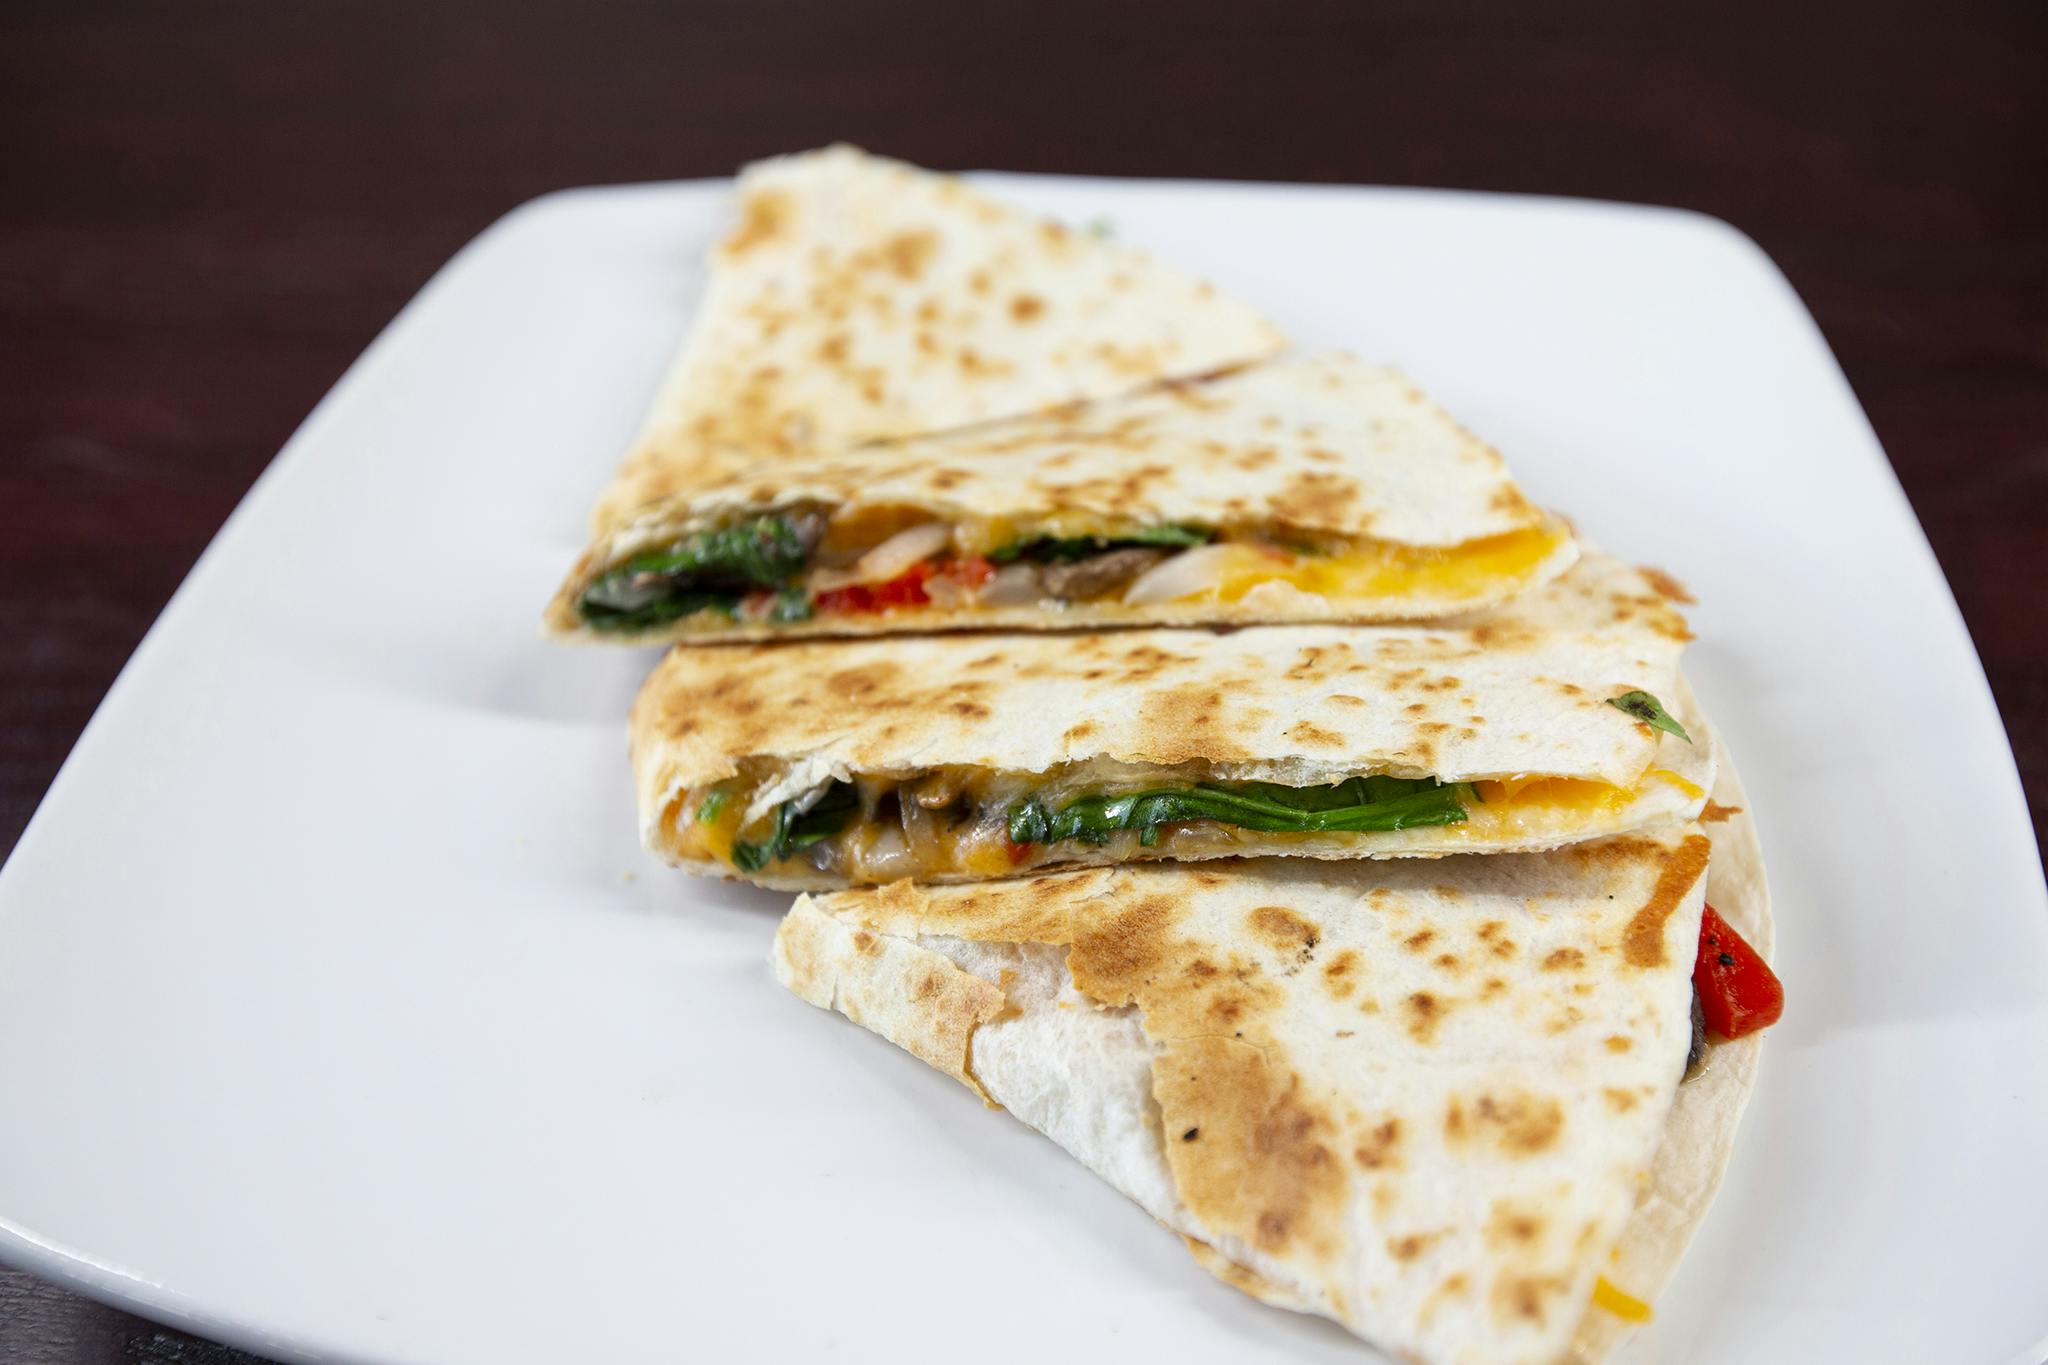 Veggie Quesadilla from Firehouse Grill - Chicago Ave in Evanston, IL